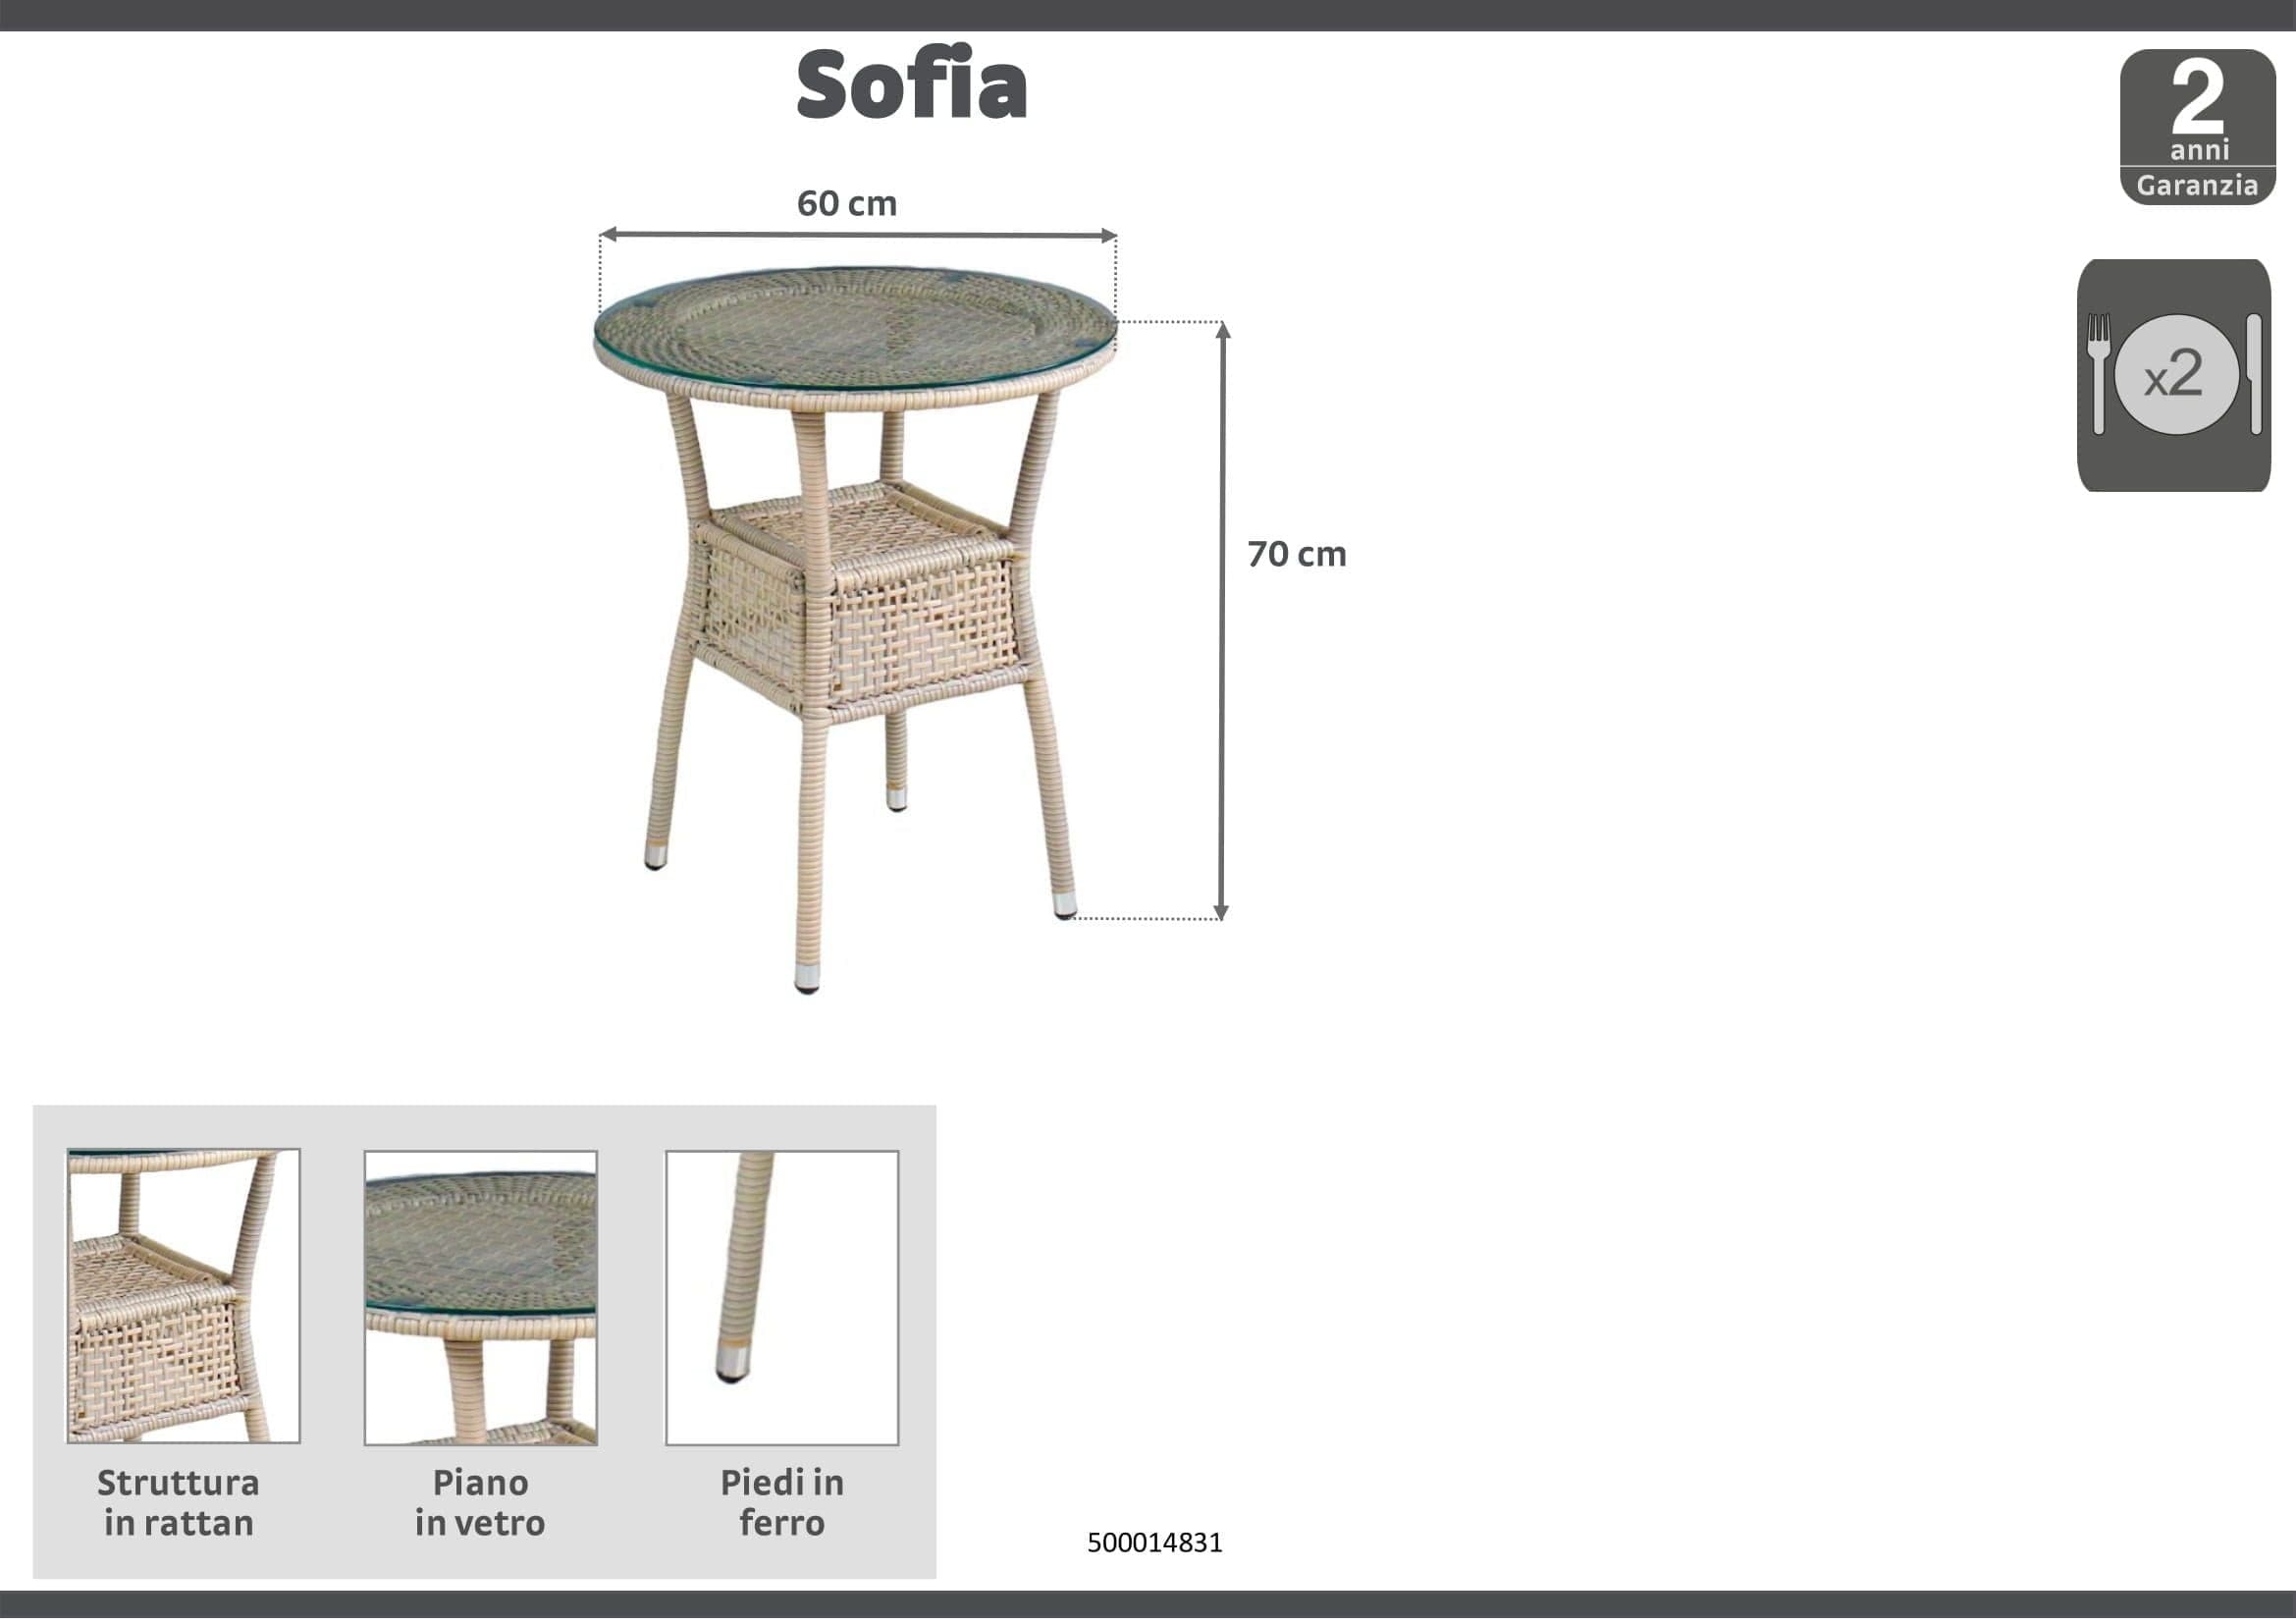 SOFIA COFFEE TABLE IN STEEL Diam 60X 72h covered in synthetic rattan with 6mm glass top